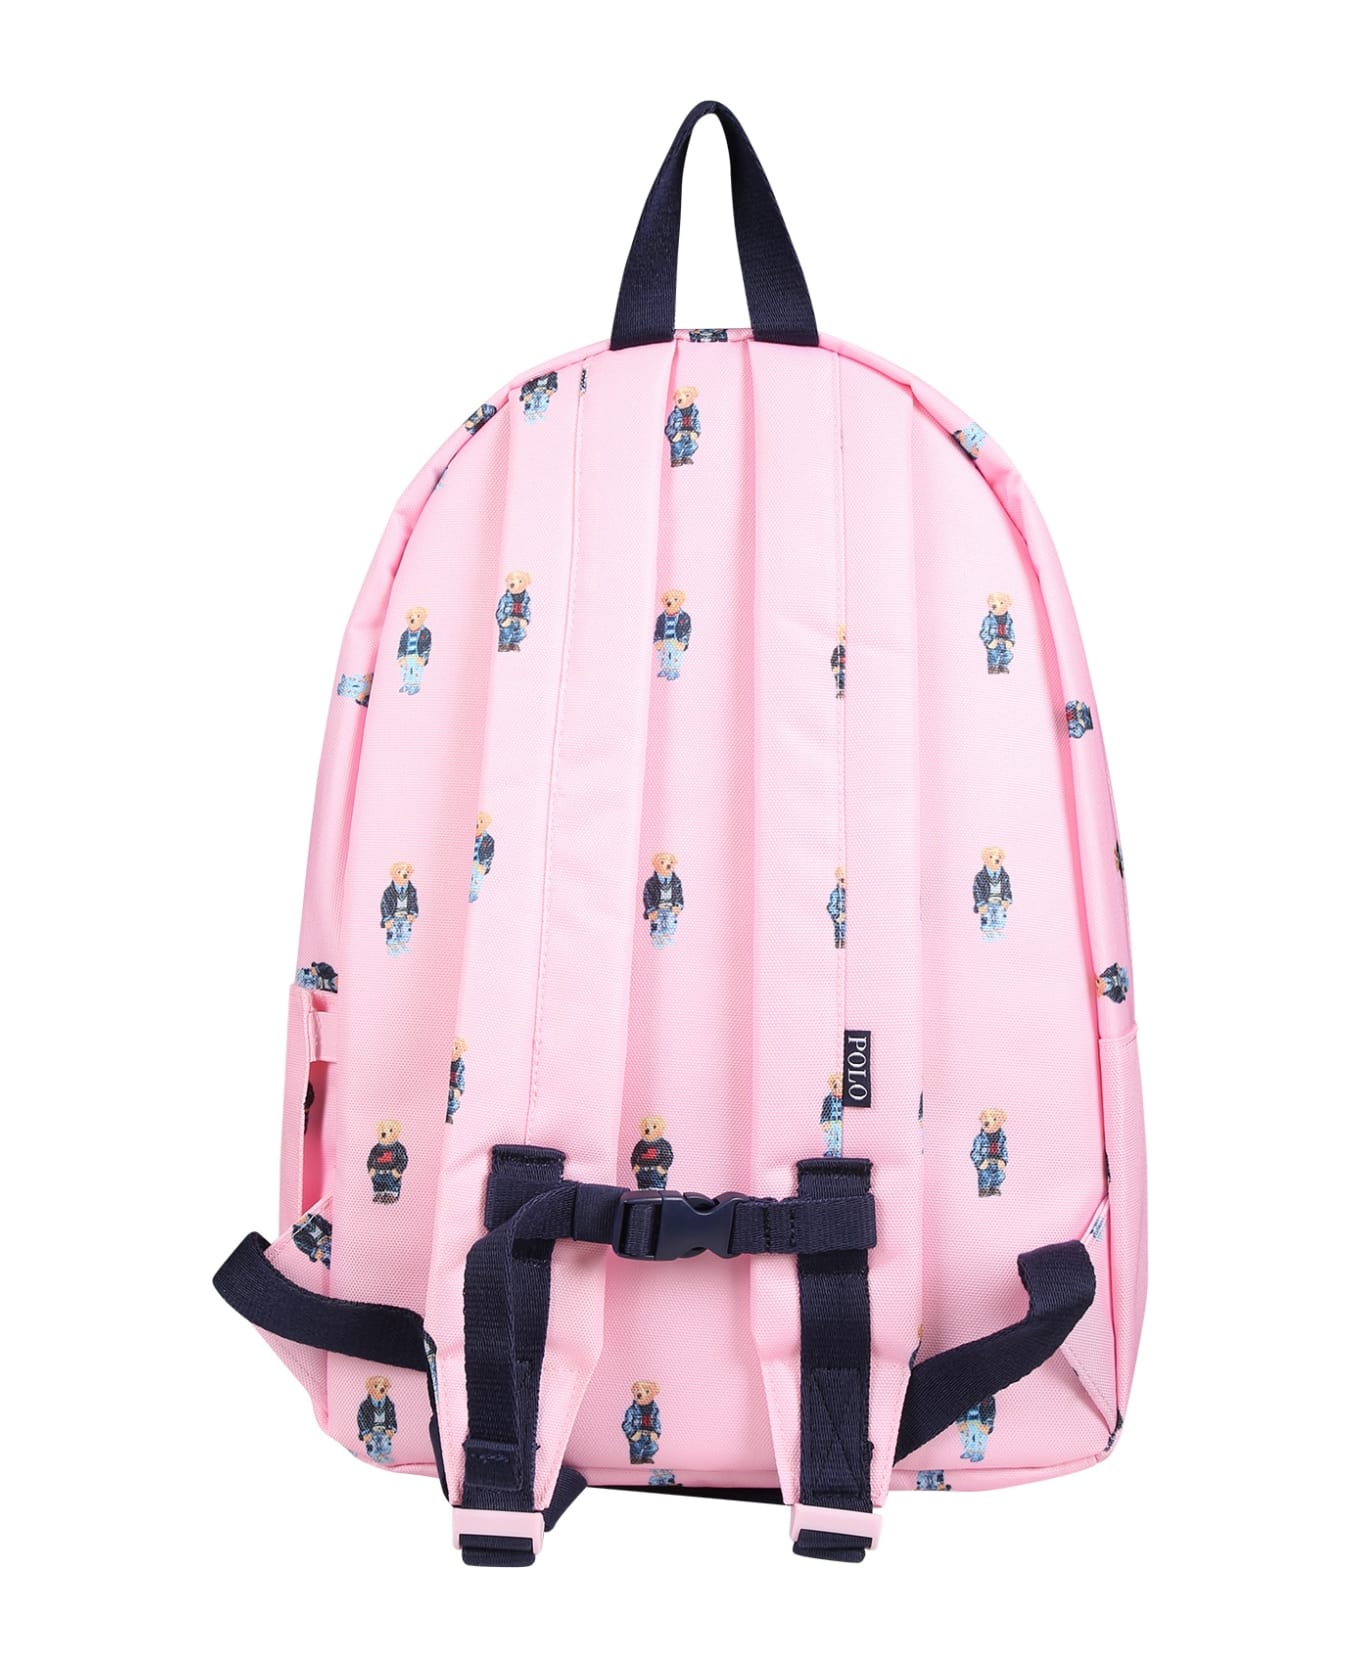 Ralph Lauren Pink Backpack For Girl With Polo Bear - Pink